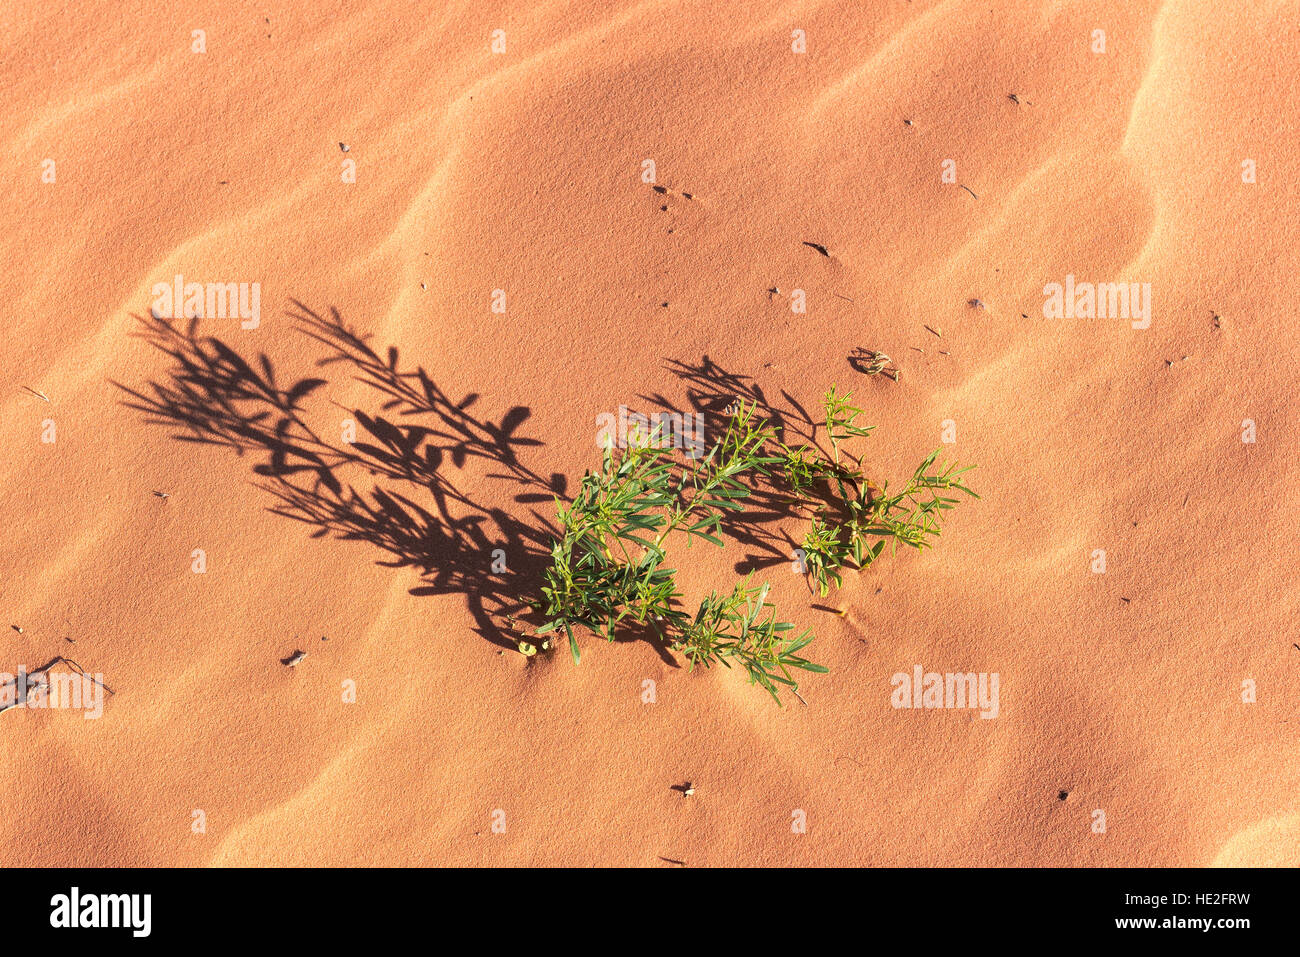 Plants on pink sands, background. Stock Photo